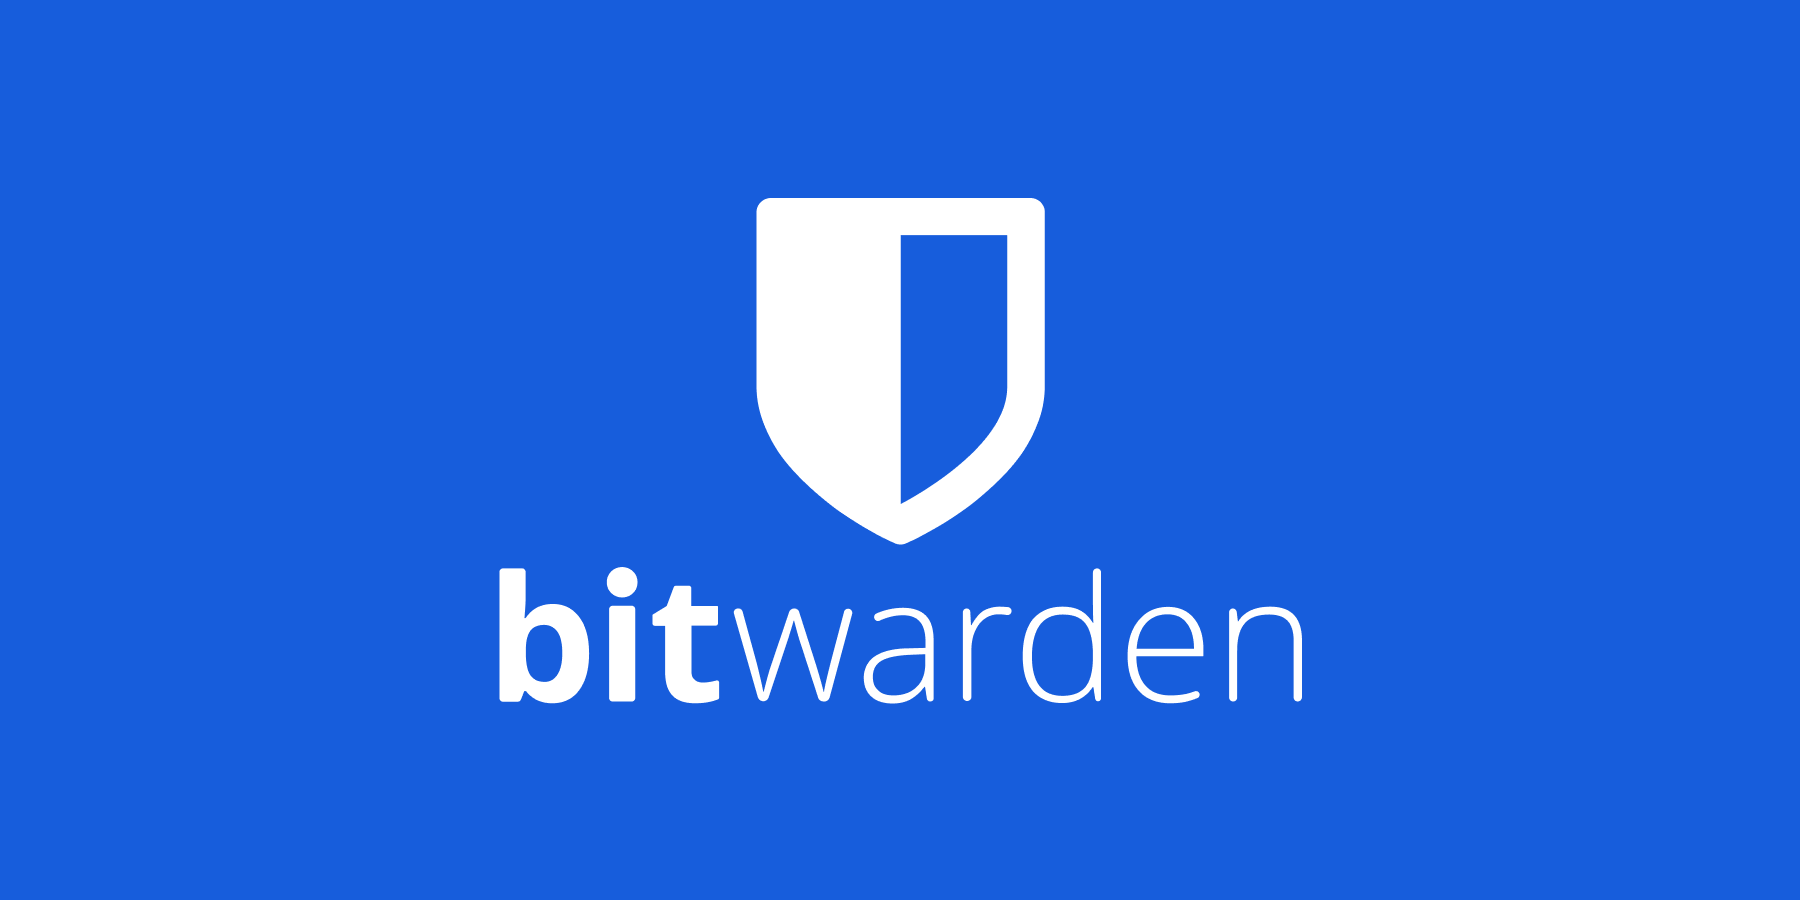 Using Bitwarden as password manager